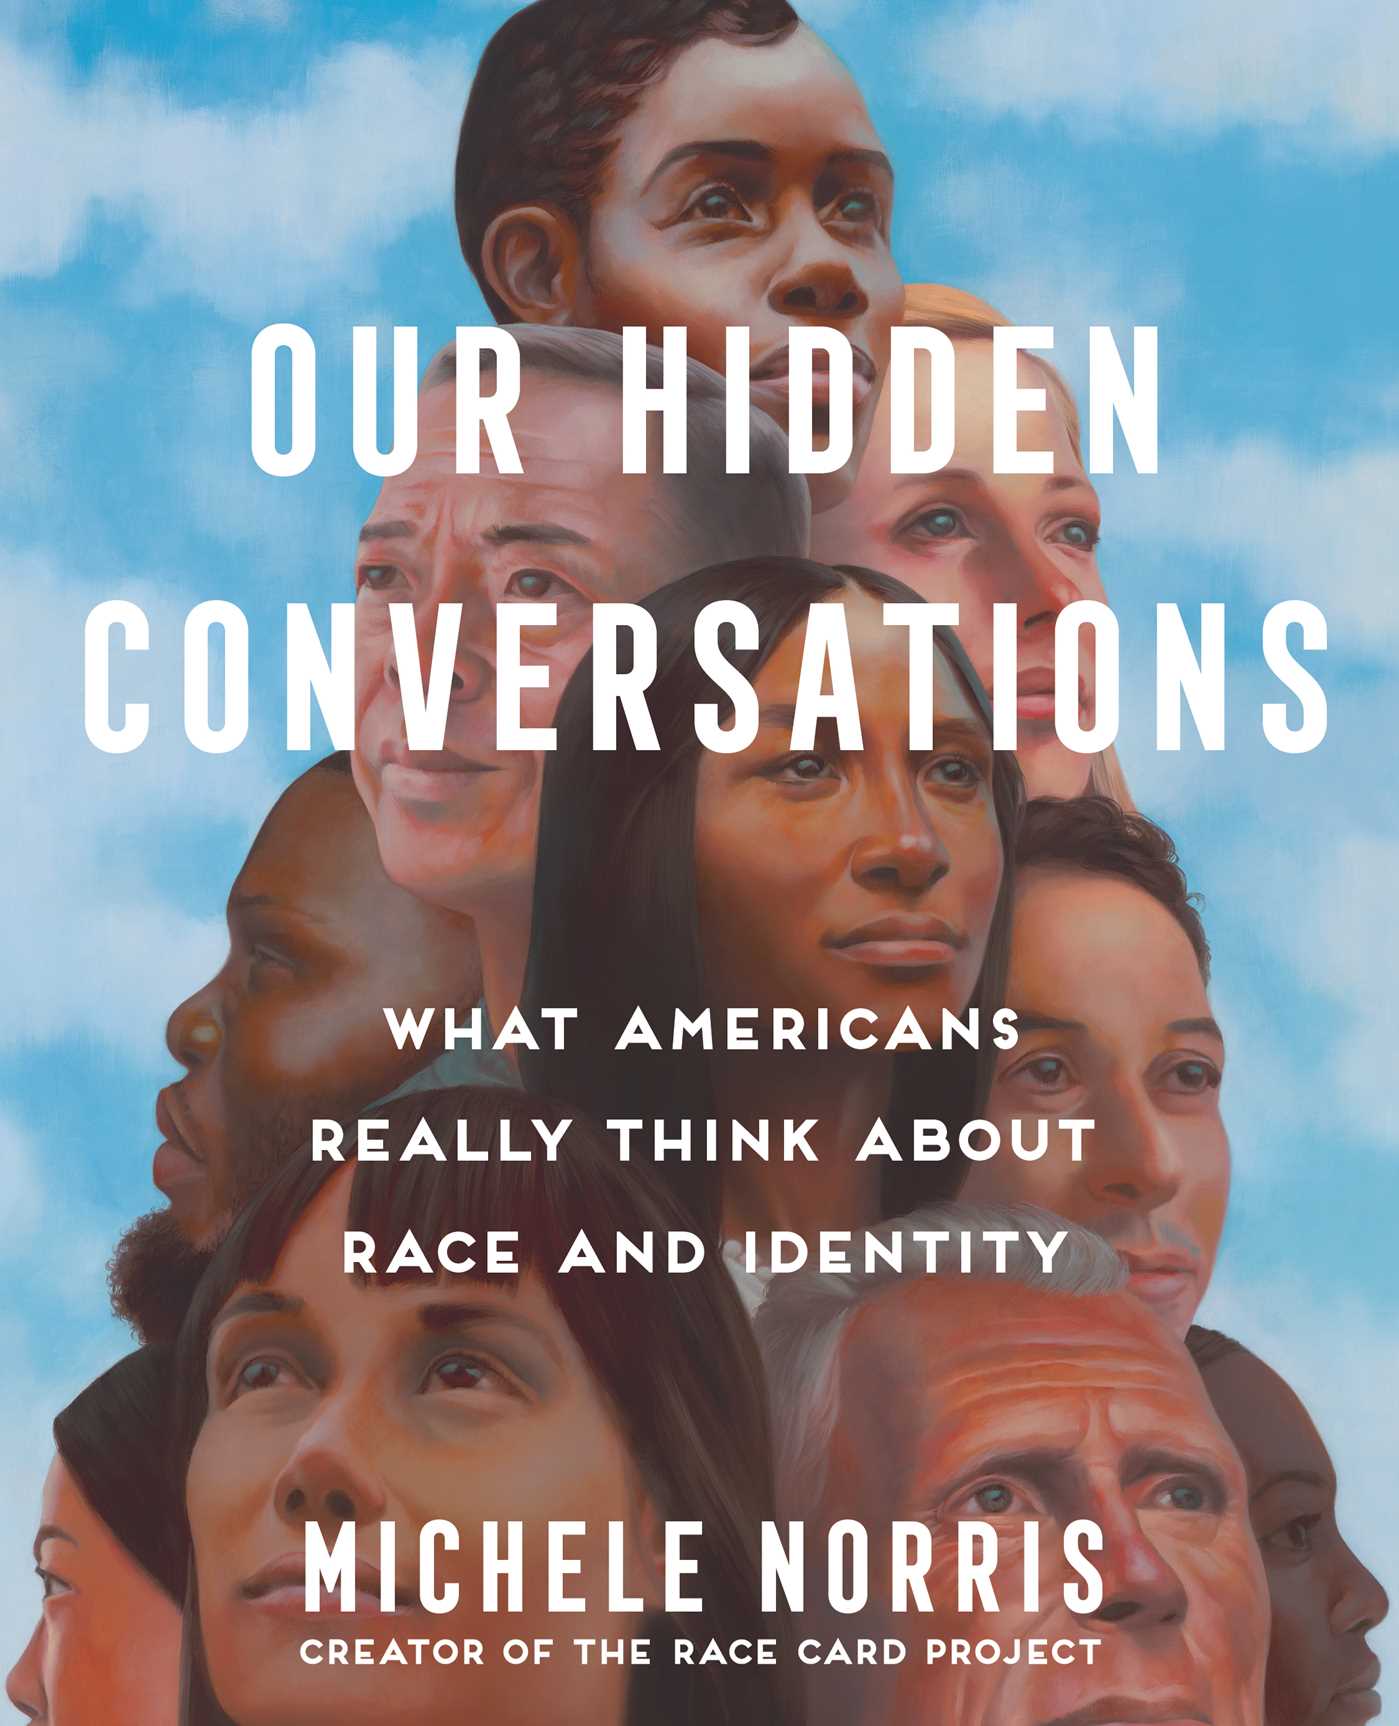 Image for "Our Hidden Conversations"